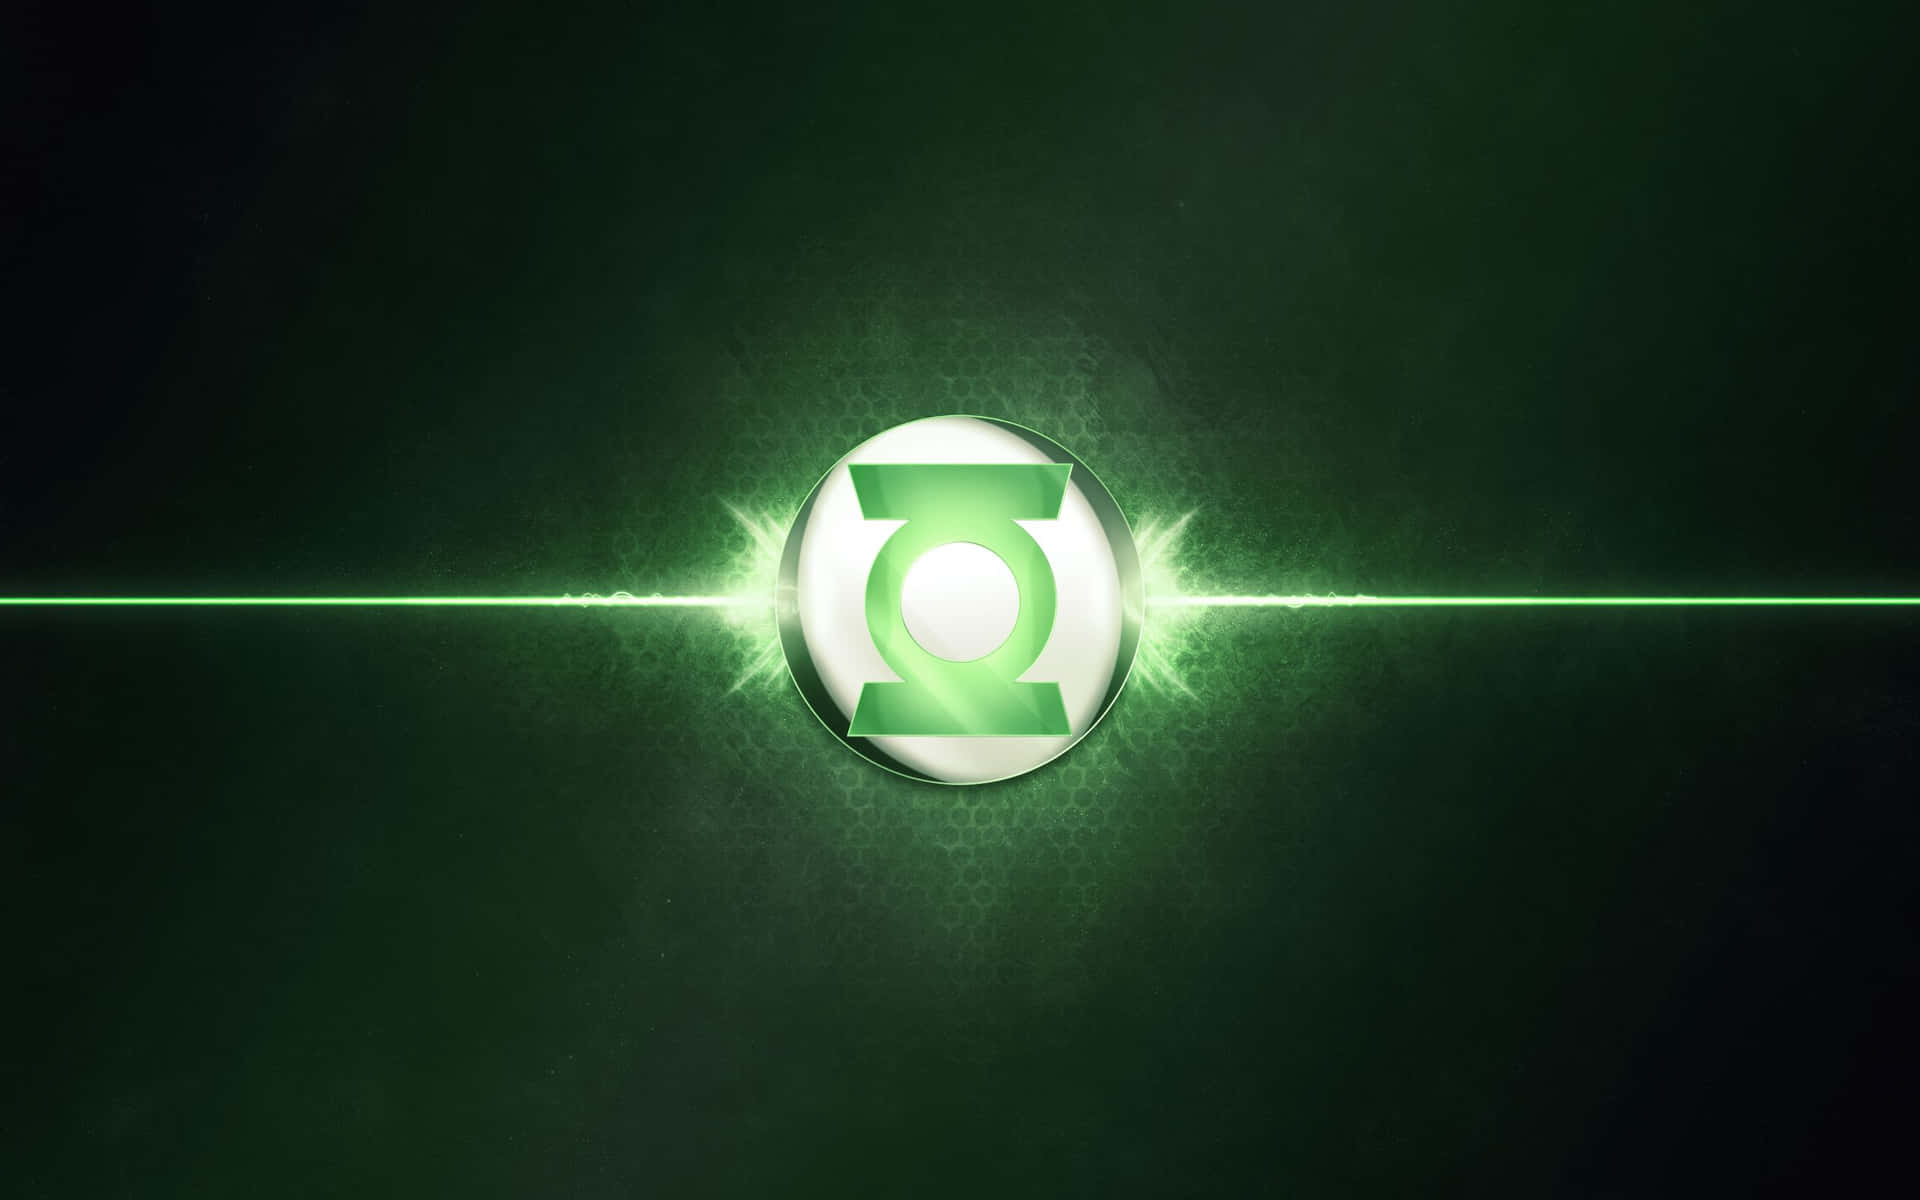 “Be Fearless with Green Lantern”